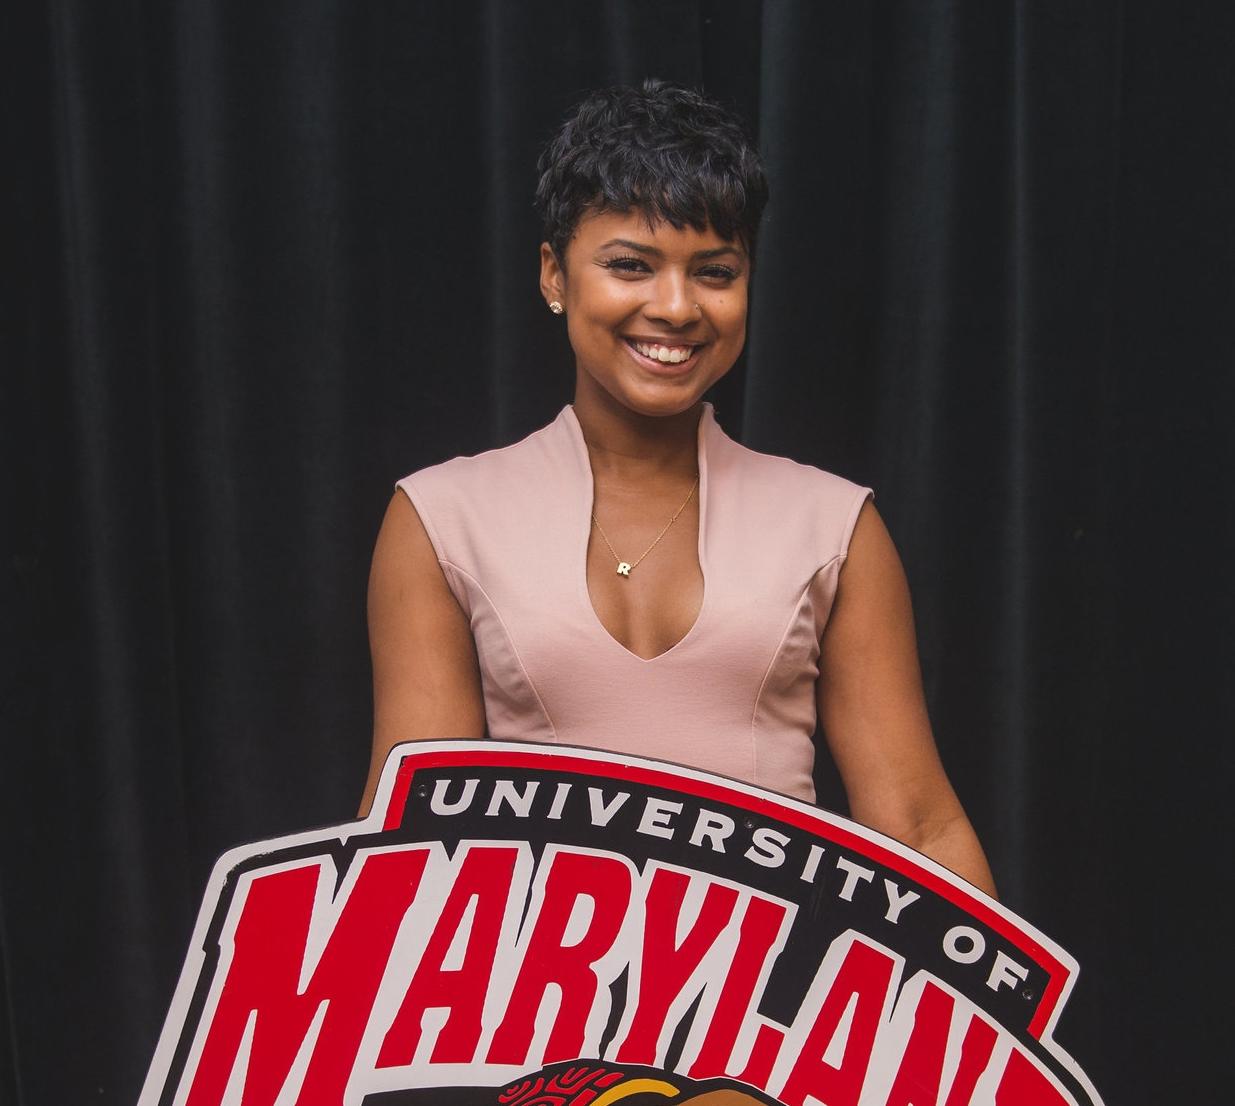 A student holding the university of Maryland banner.